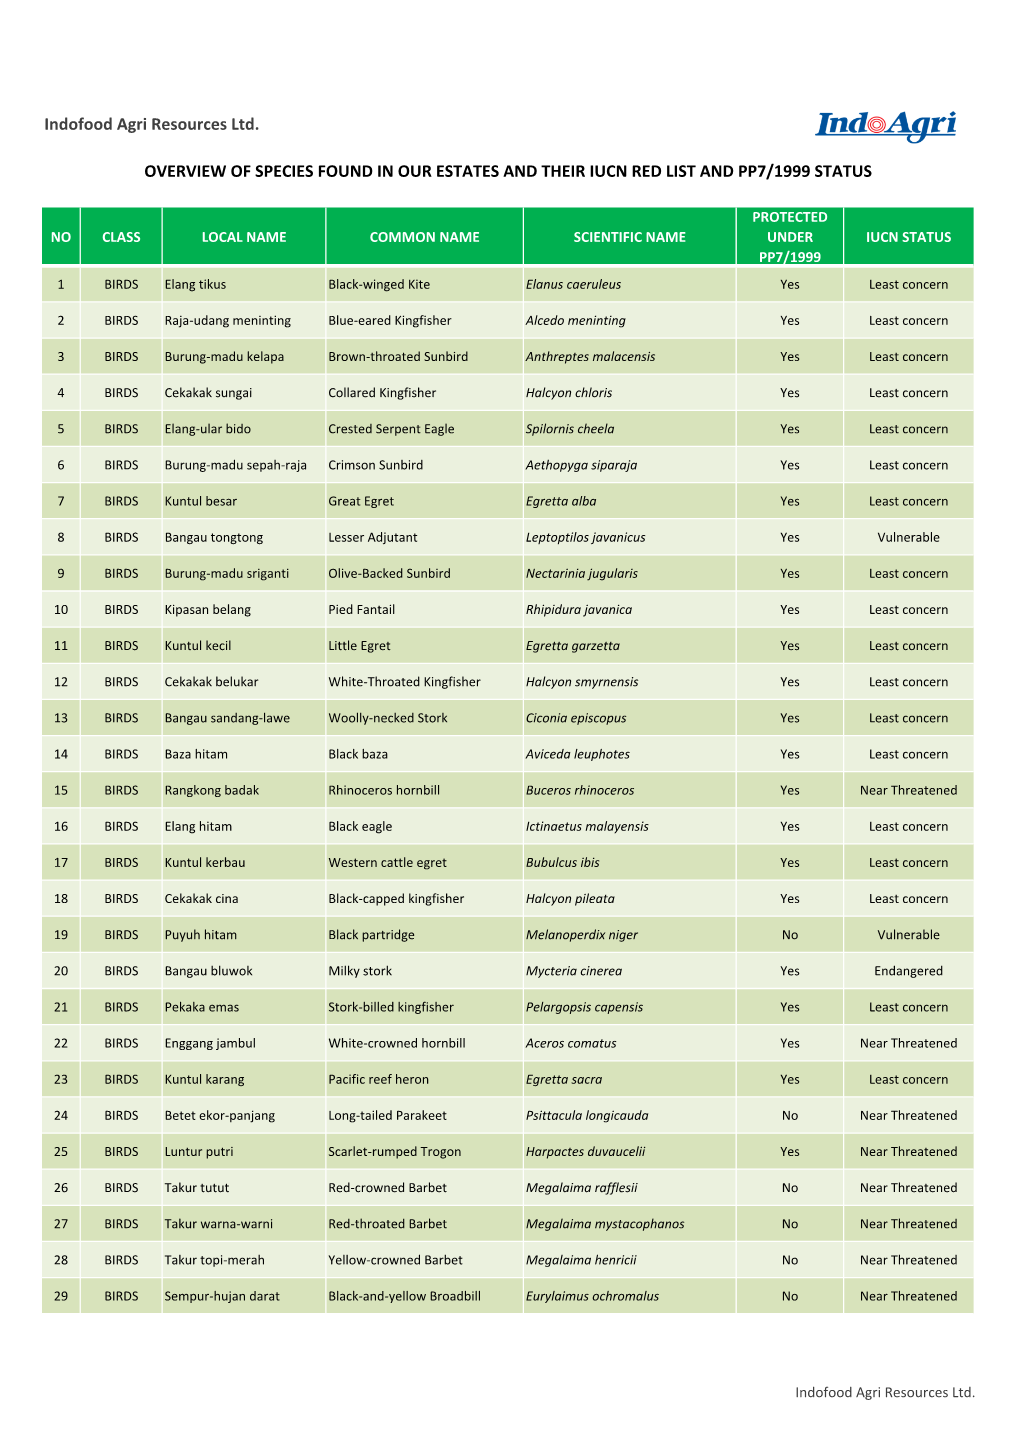 Species List of Protected Flora and Fauna Indoagri